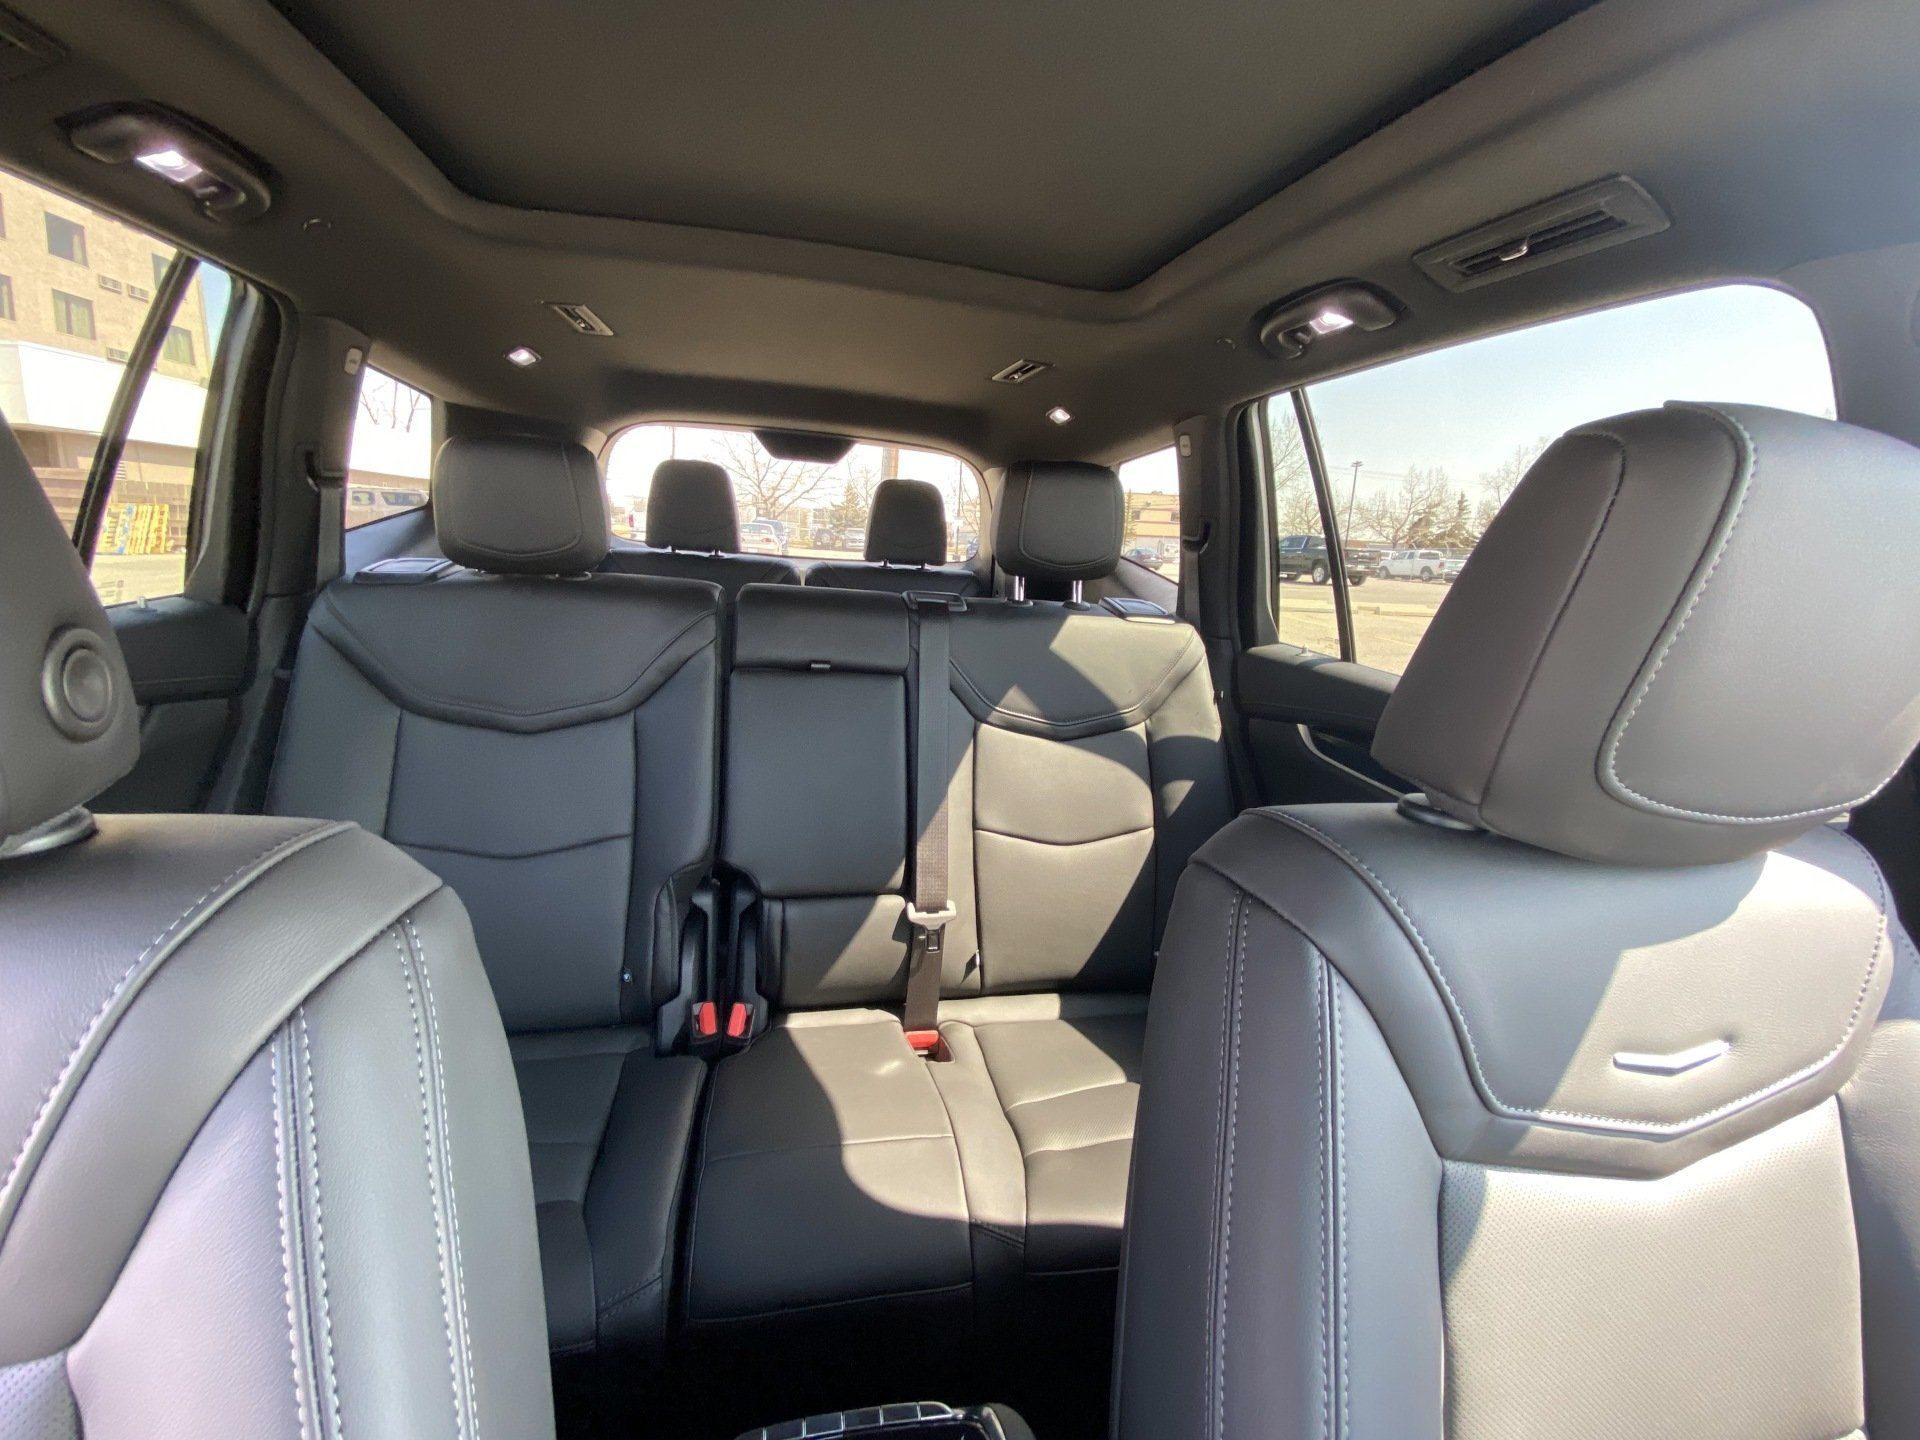 Limo To Go luxury interior leather seating Cadillac XT6